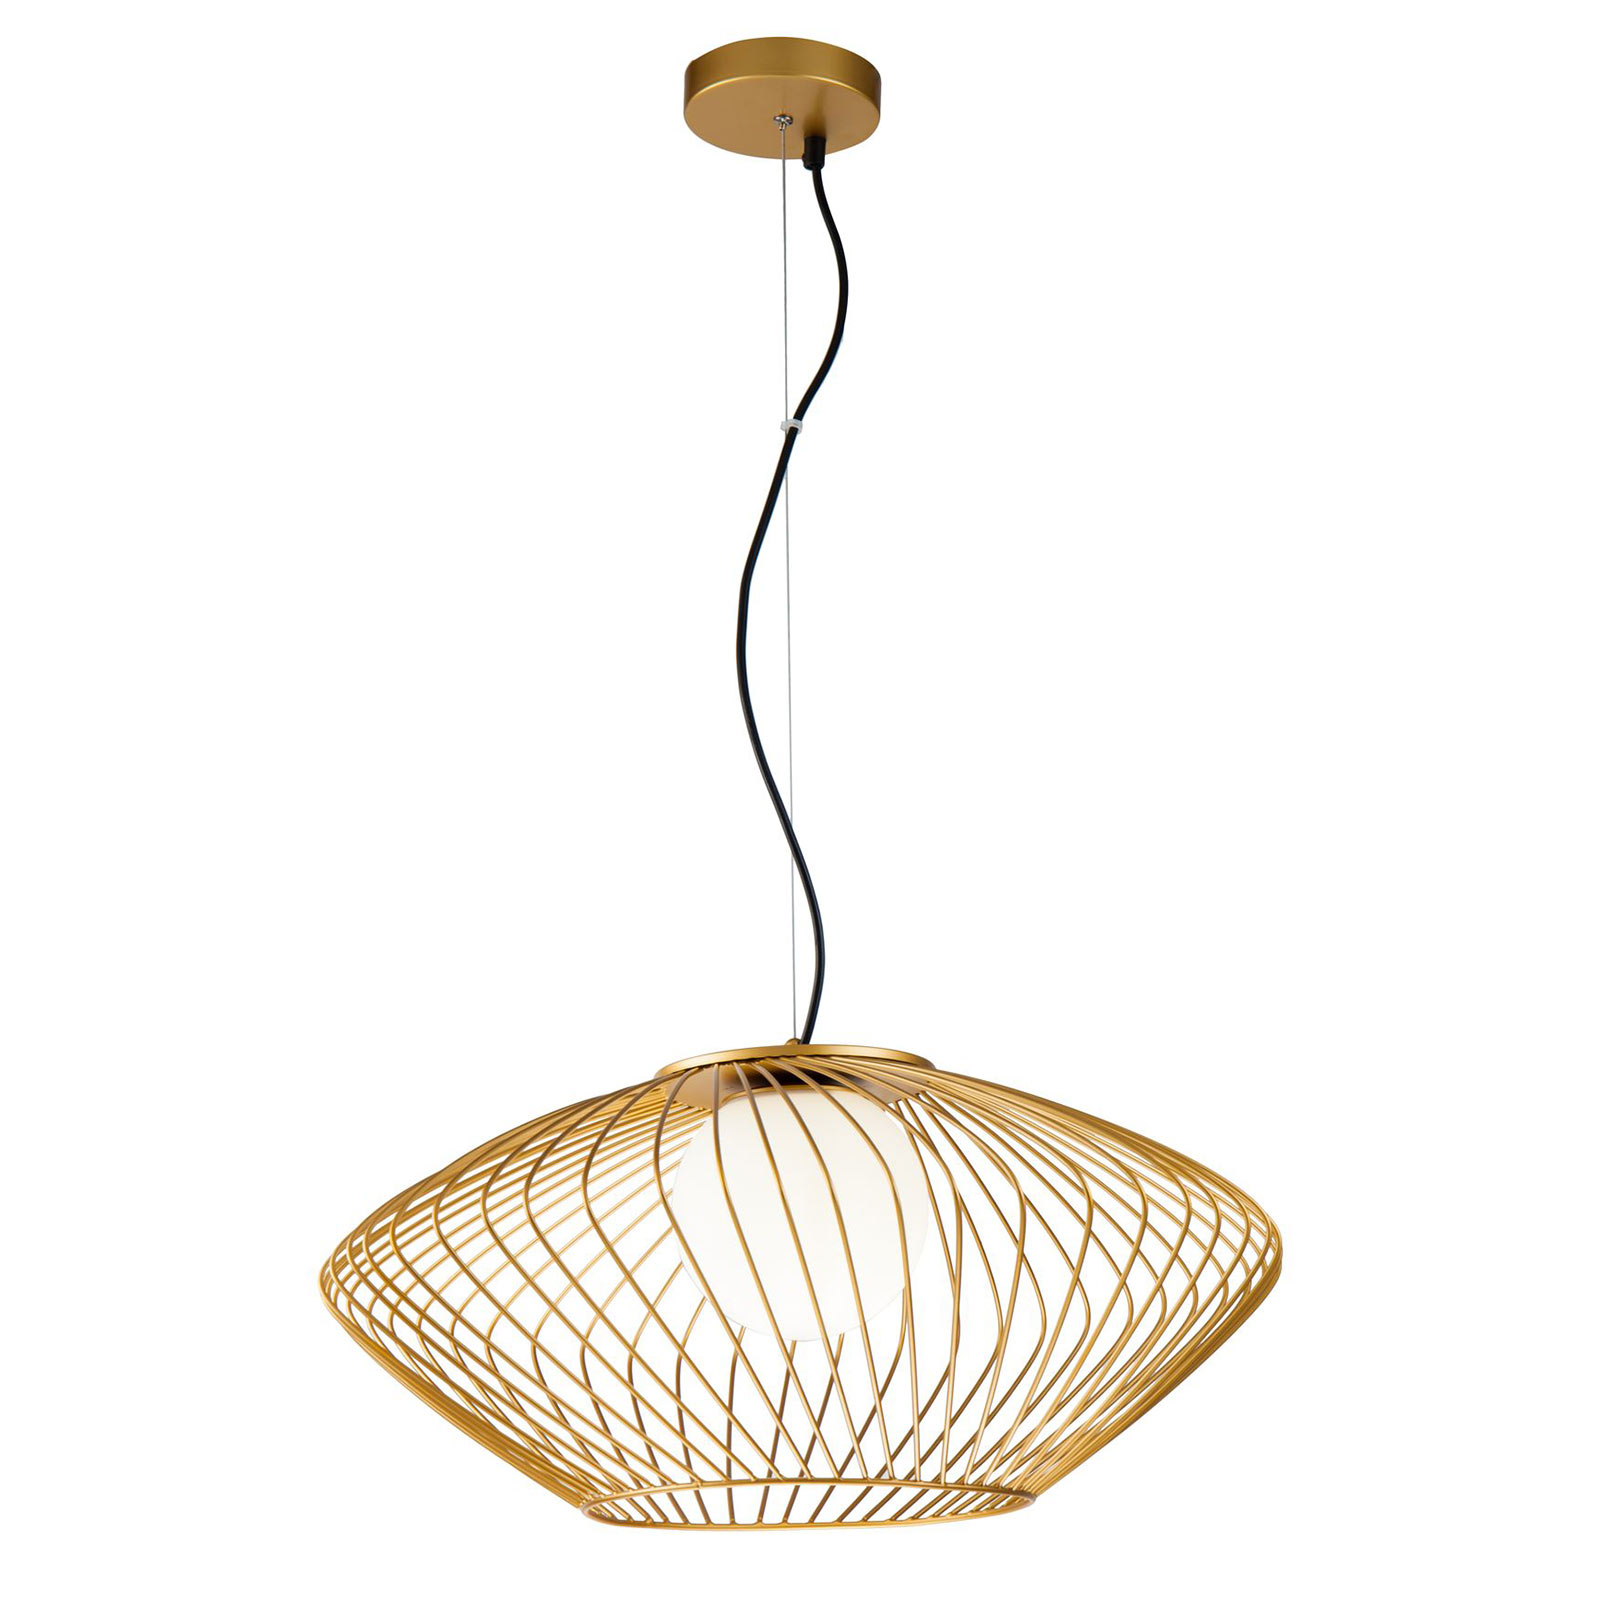 Plec hanging light with cage lampshade in gold